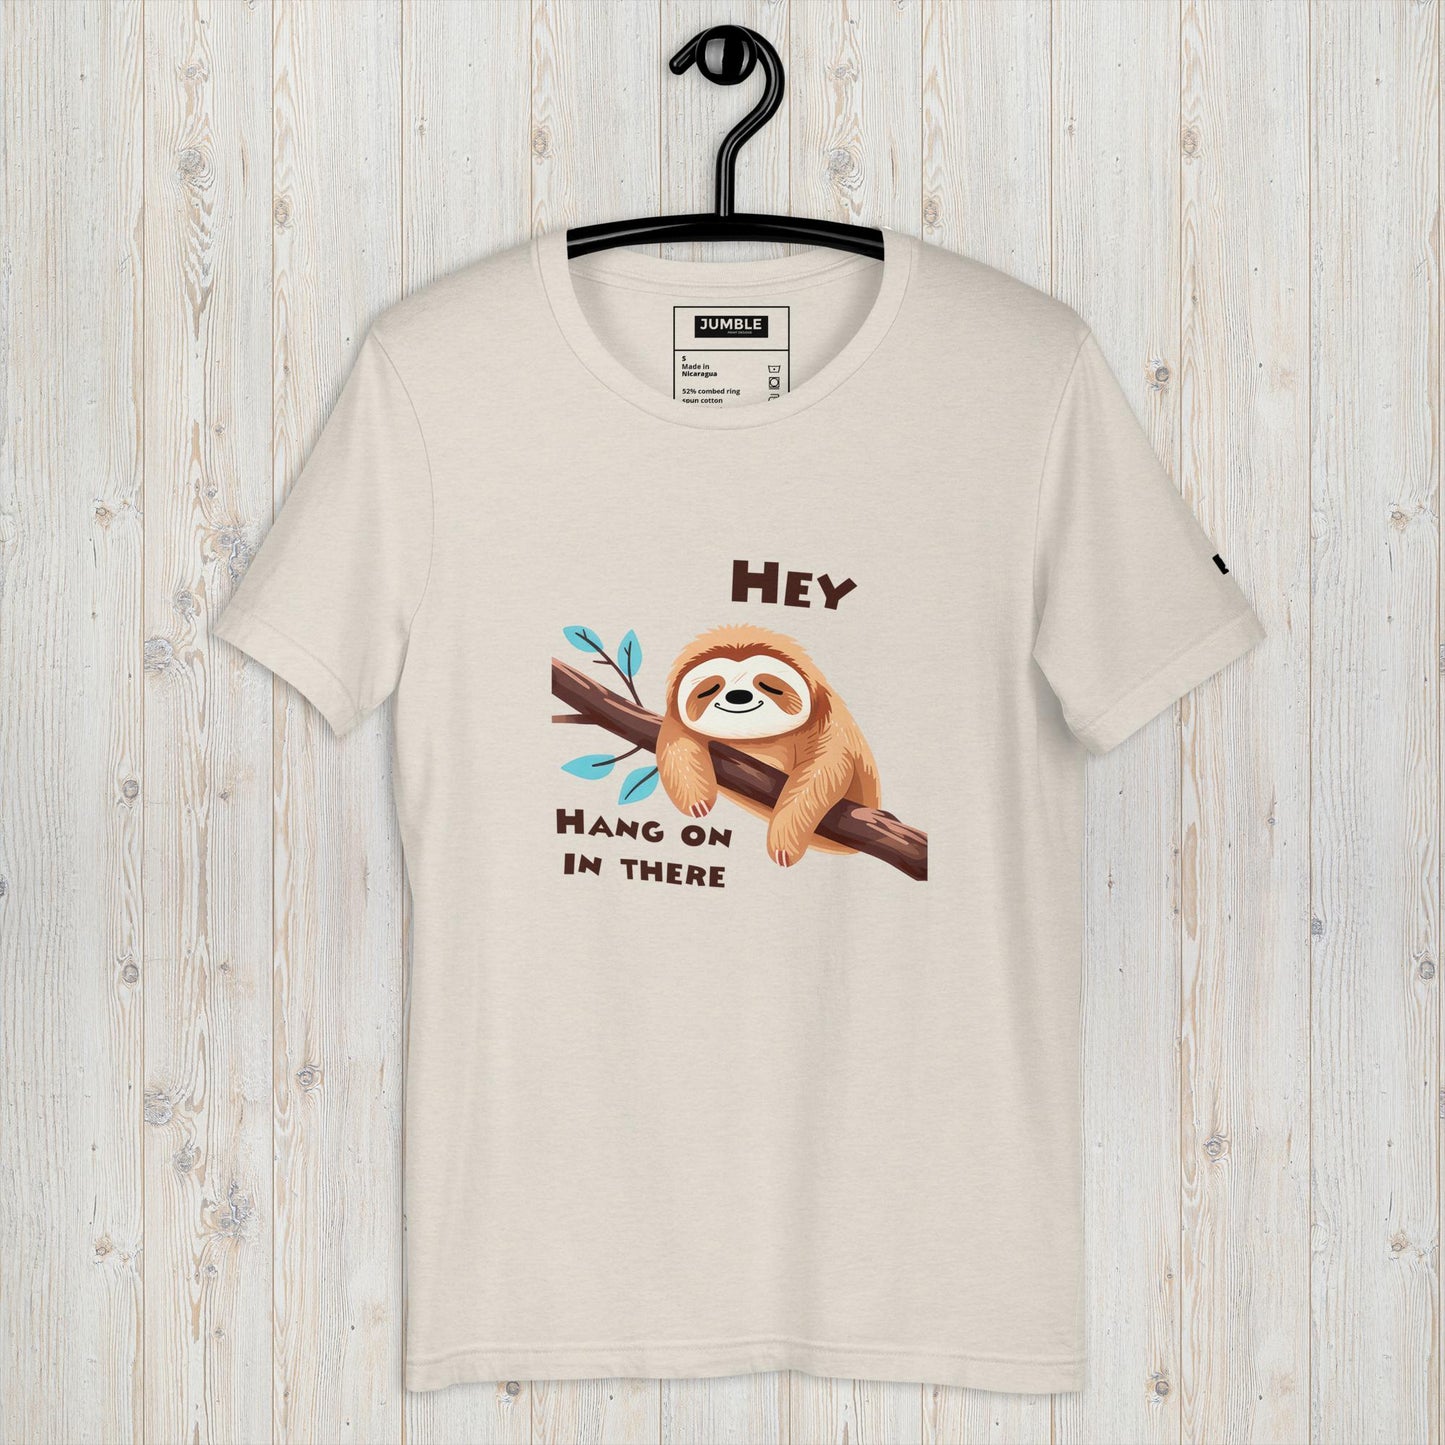 Hey, Hang on in there Unisex t-shirt